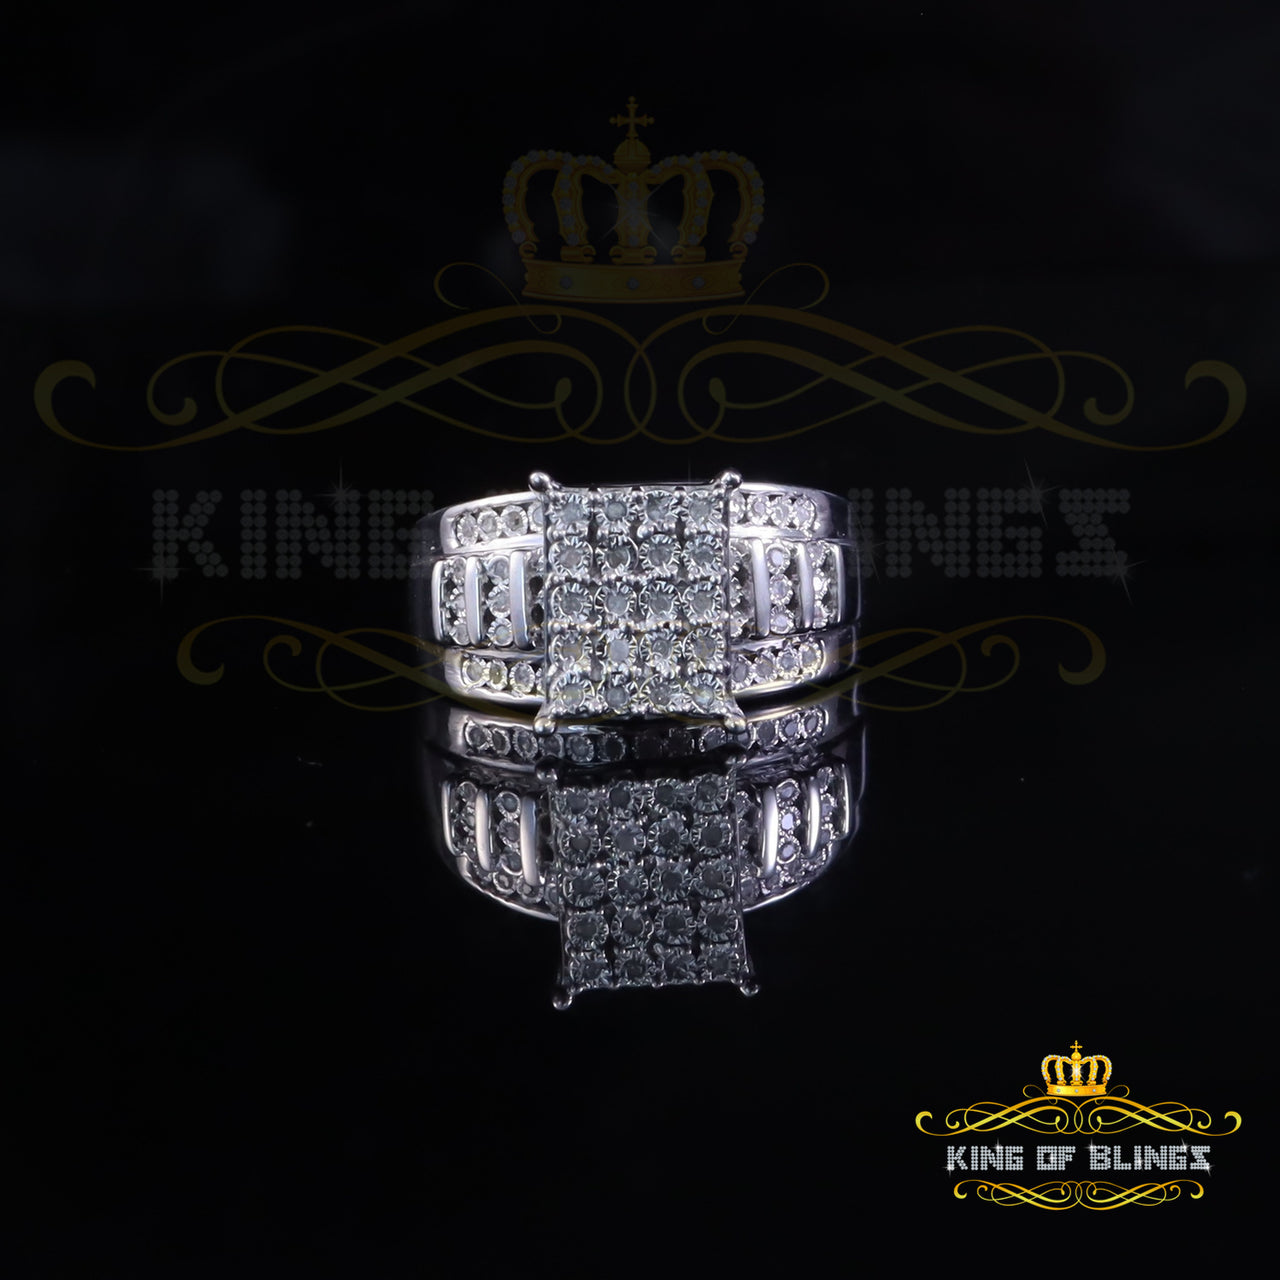 King Of Bling's 0.20ct Real Diamond 925 Silver White Rectangle Cinderella Womens Ring Size 8.5 KING OF BLINGS